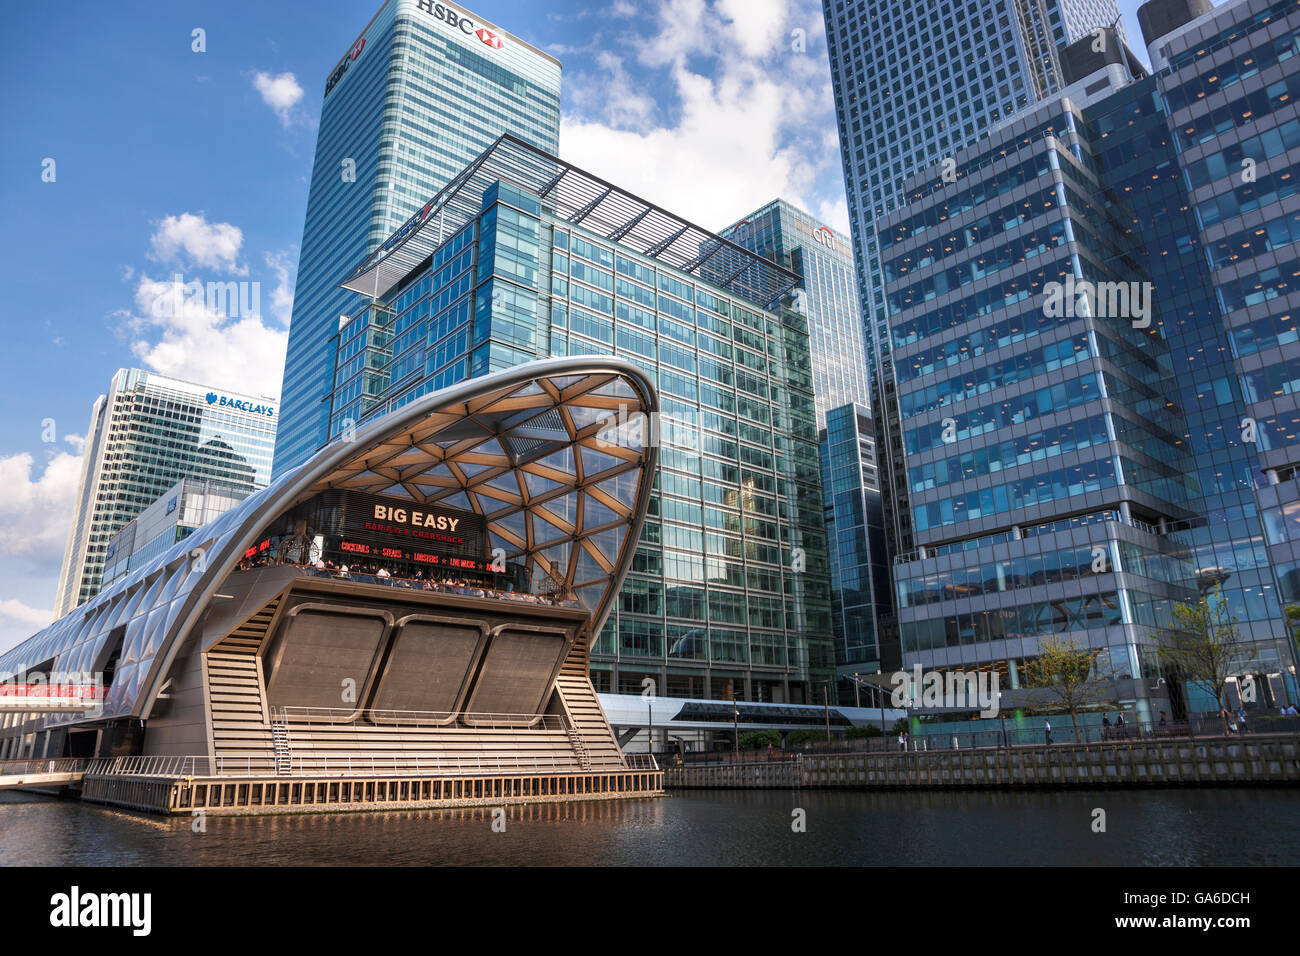 Canary Wharf crossrail station with Canary Wharf skyscrapers in the background Stock Photo